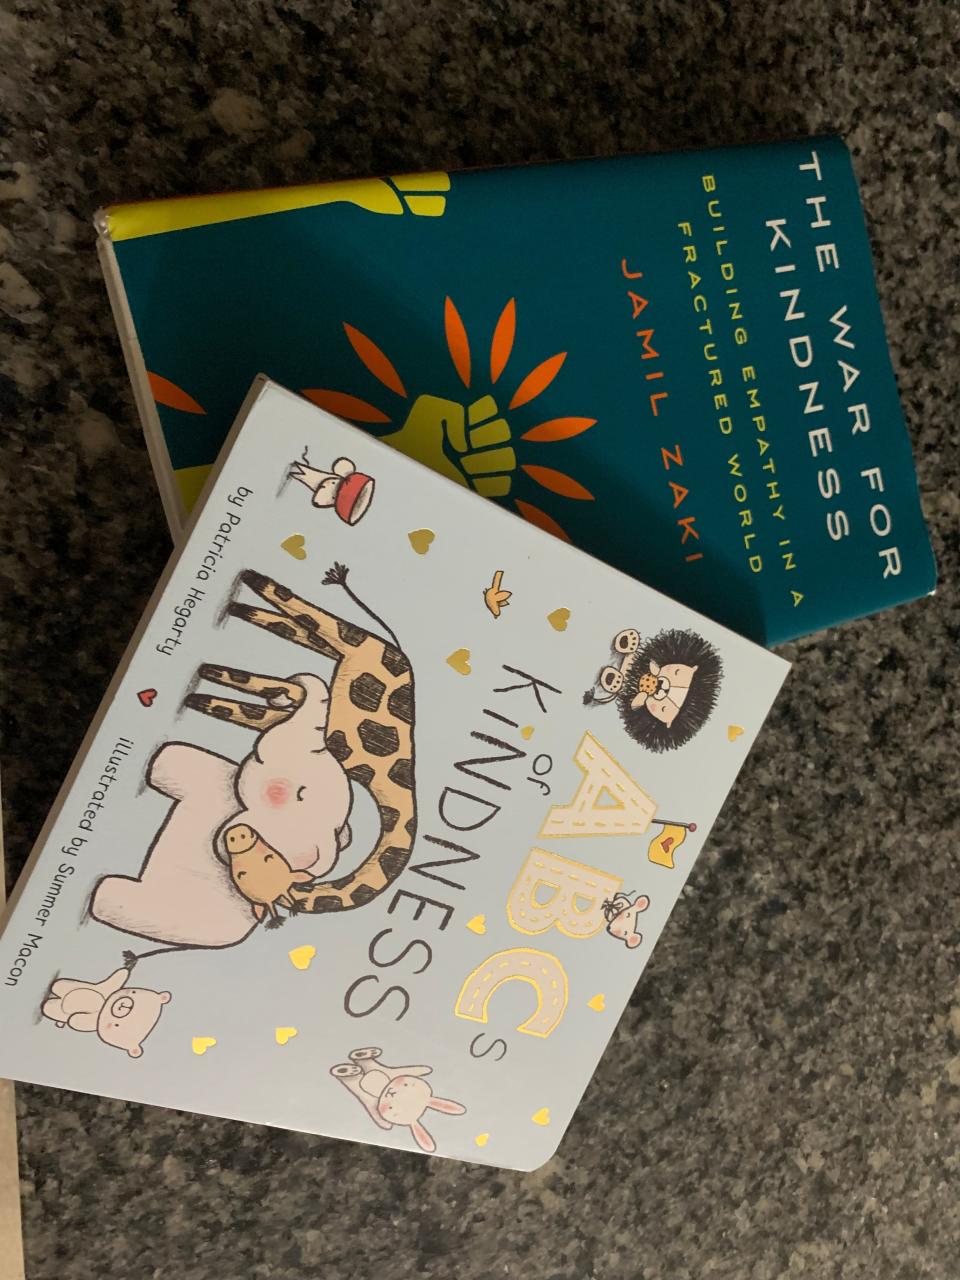 A number of helpful books have been written on the topic of kindness, ranging from Jamil Zaki’s “The War for Kindness,” to Patricia Hegarty’s board book for preschoolers, “ABCs of Kindness.”